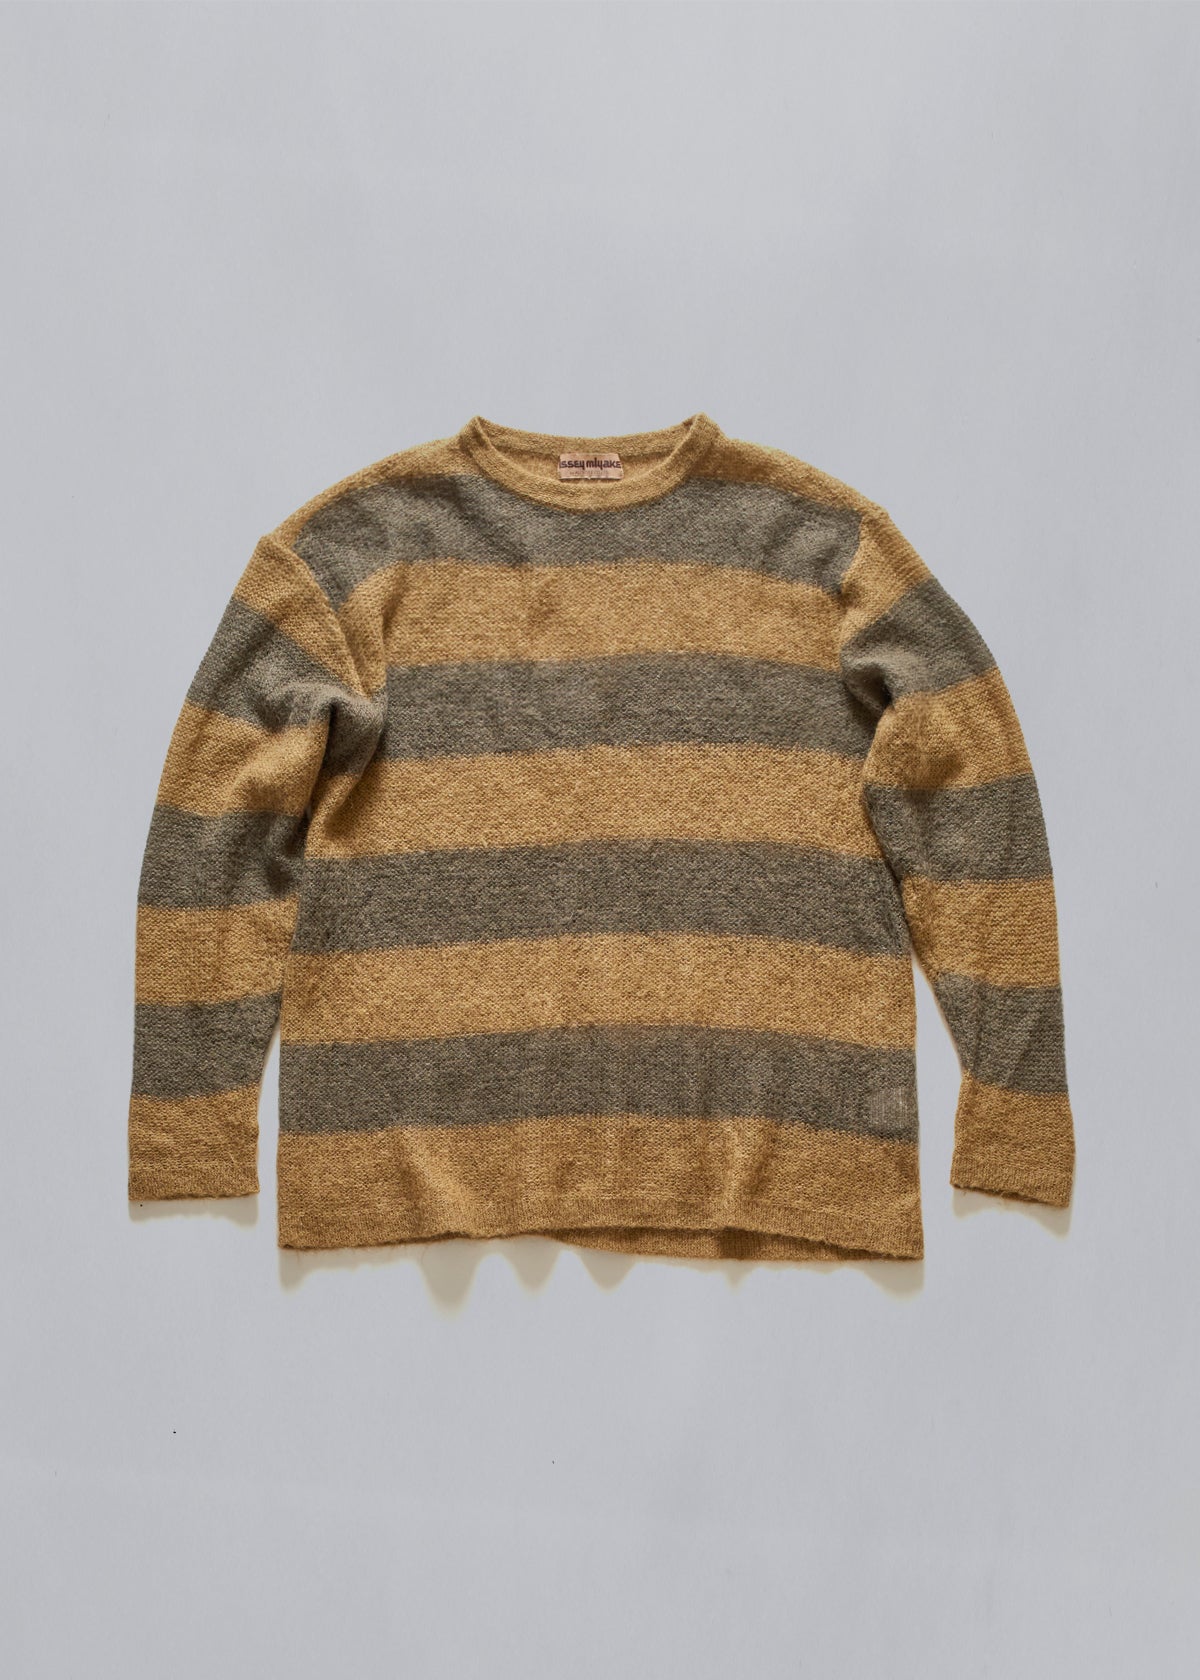 Mohair Striped Knit 1970's - Medium - The Archivist Store